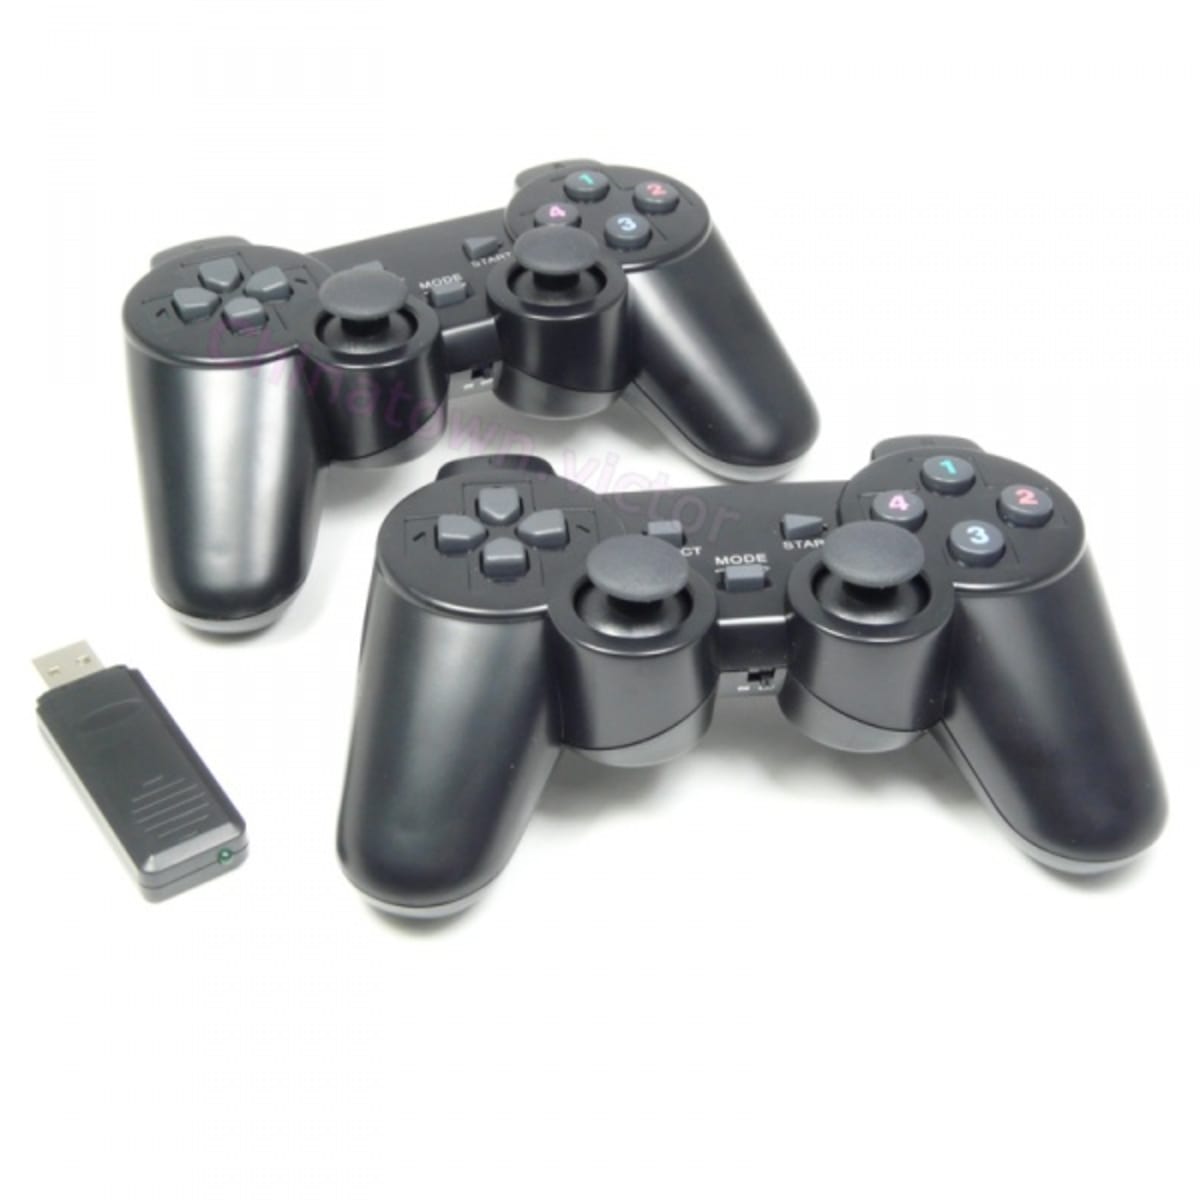 Twin Wireless Gamepad for PC